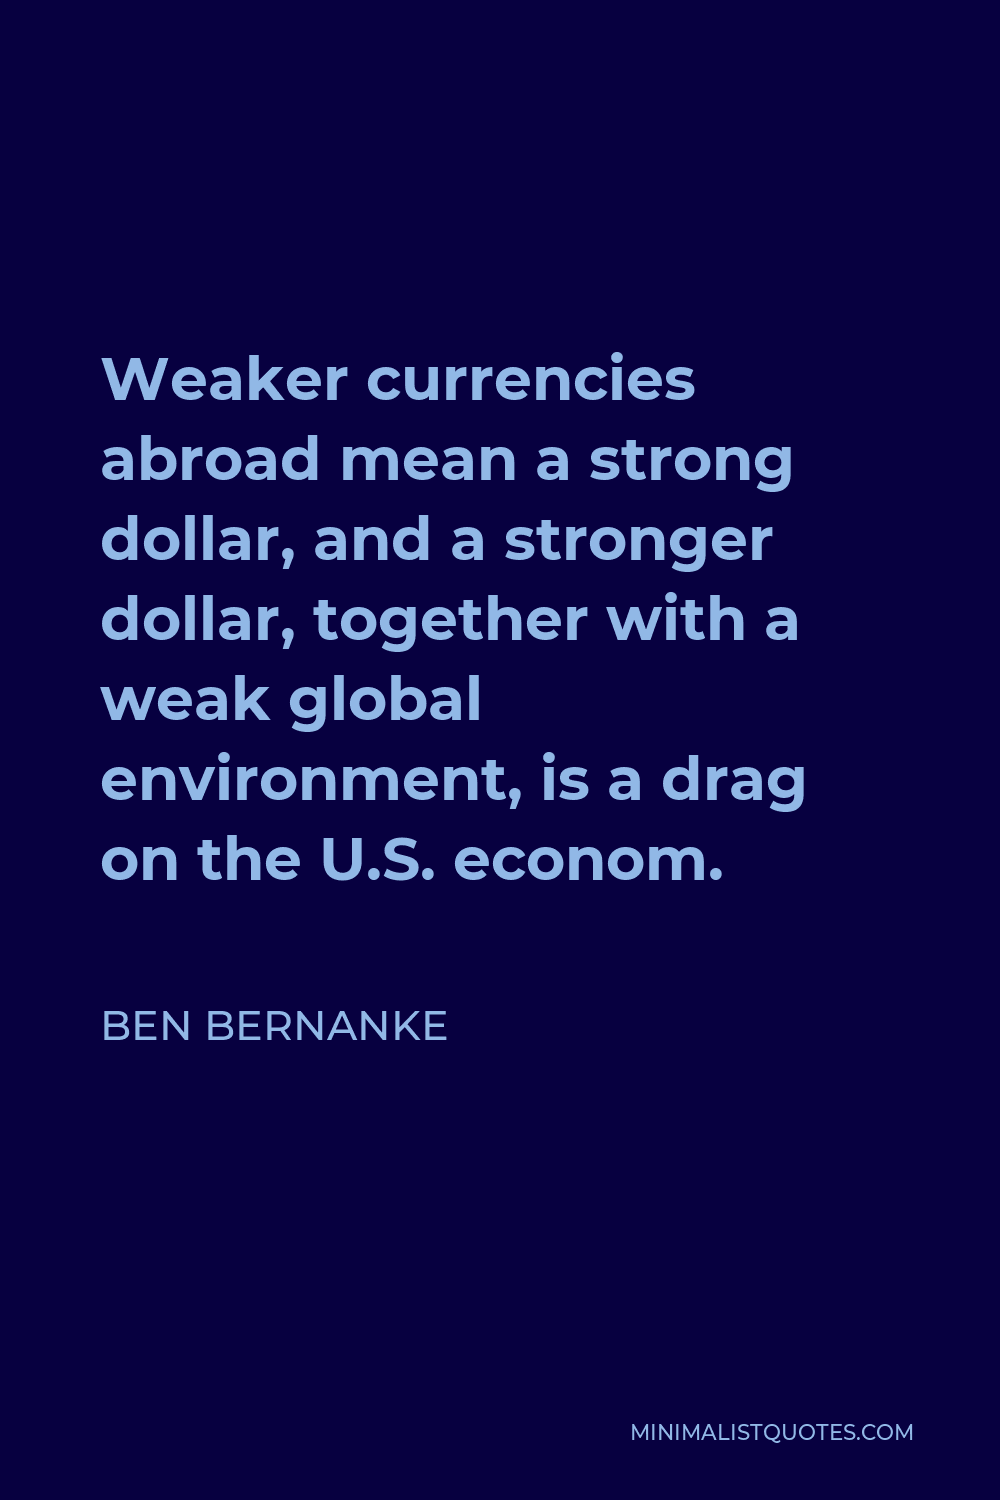 Ben Bernanke Quote - Weaker currencies abroad mean a strong dollar, and a stronger dollar, together with a weak global environment, is a drag on the U.S. econom.